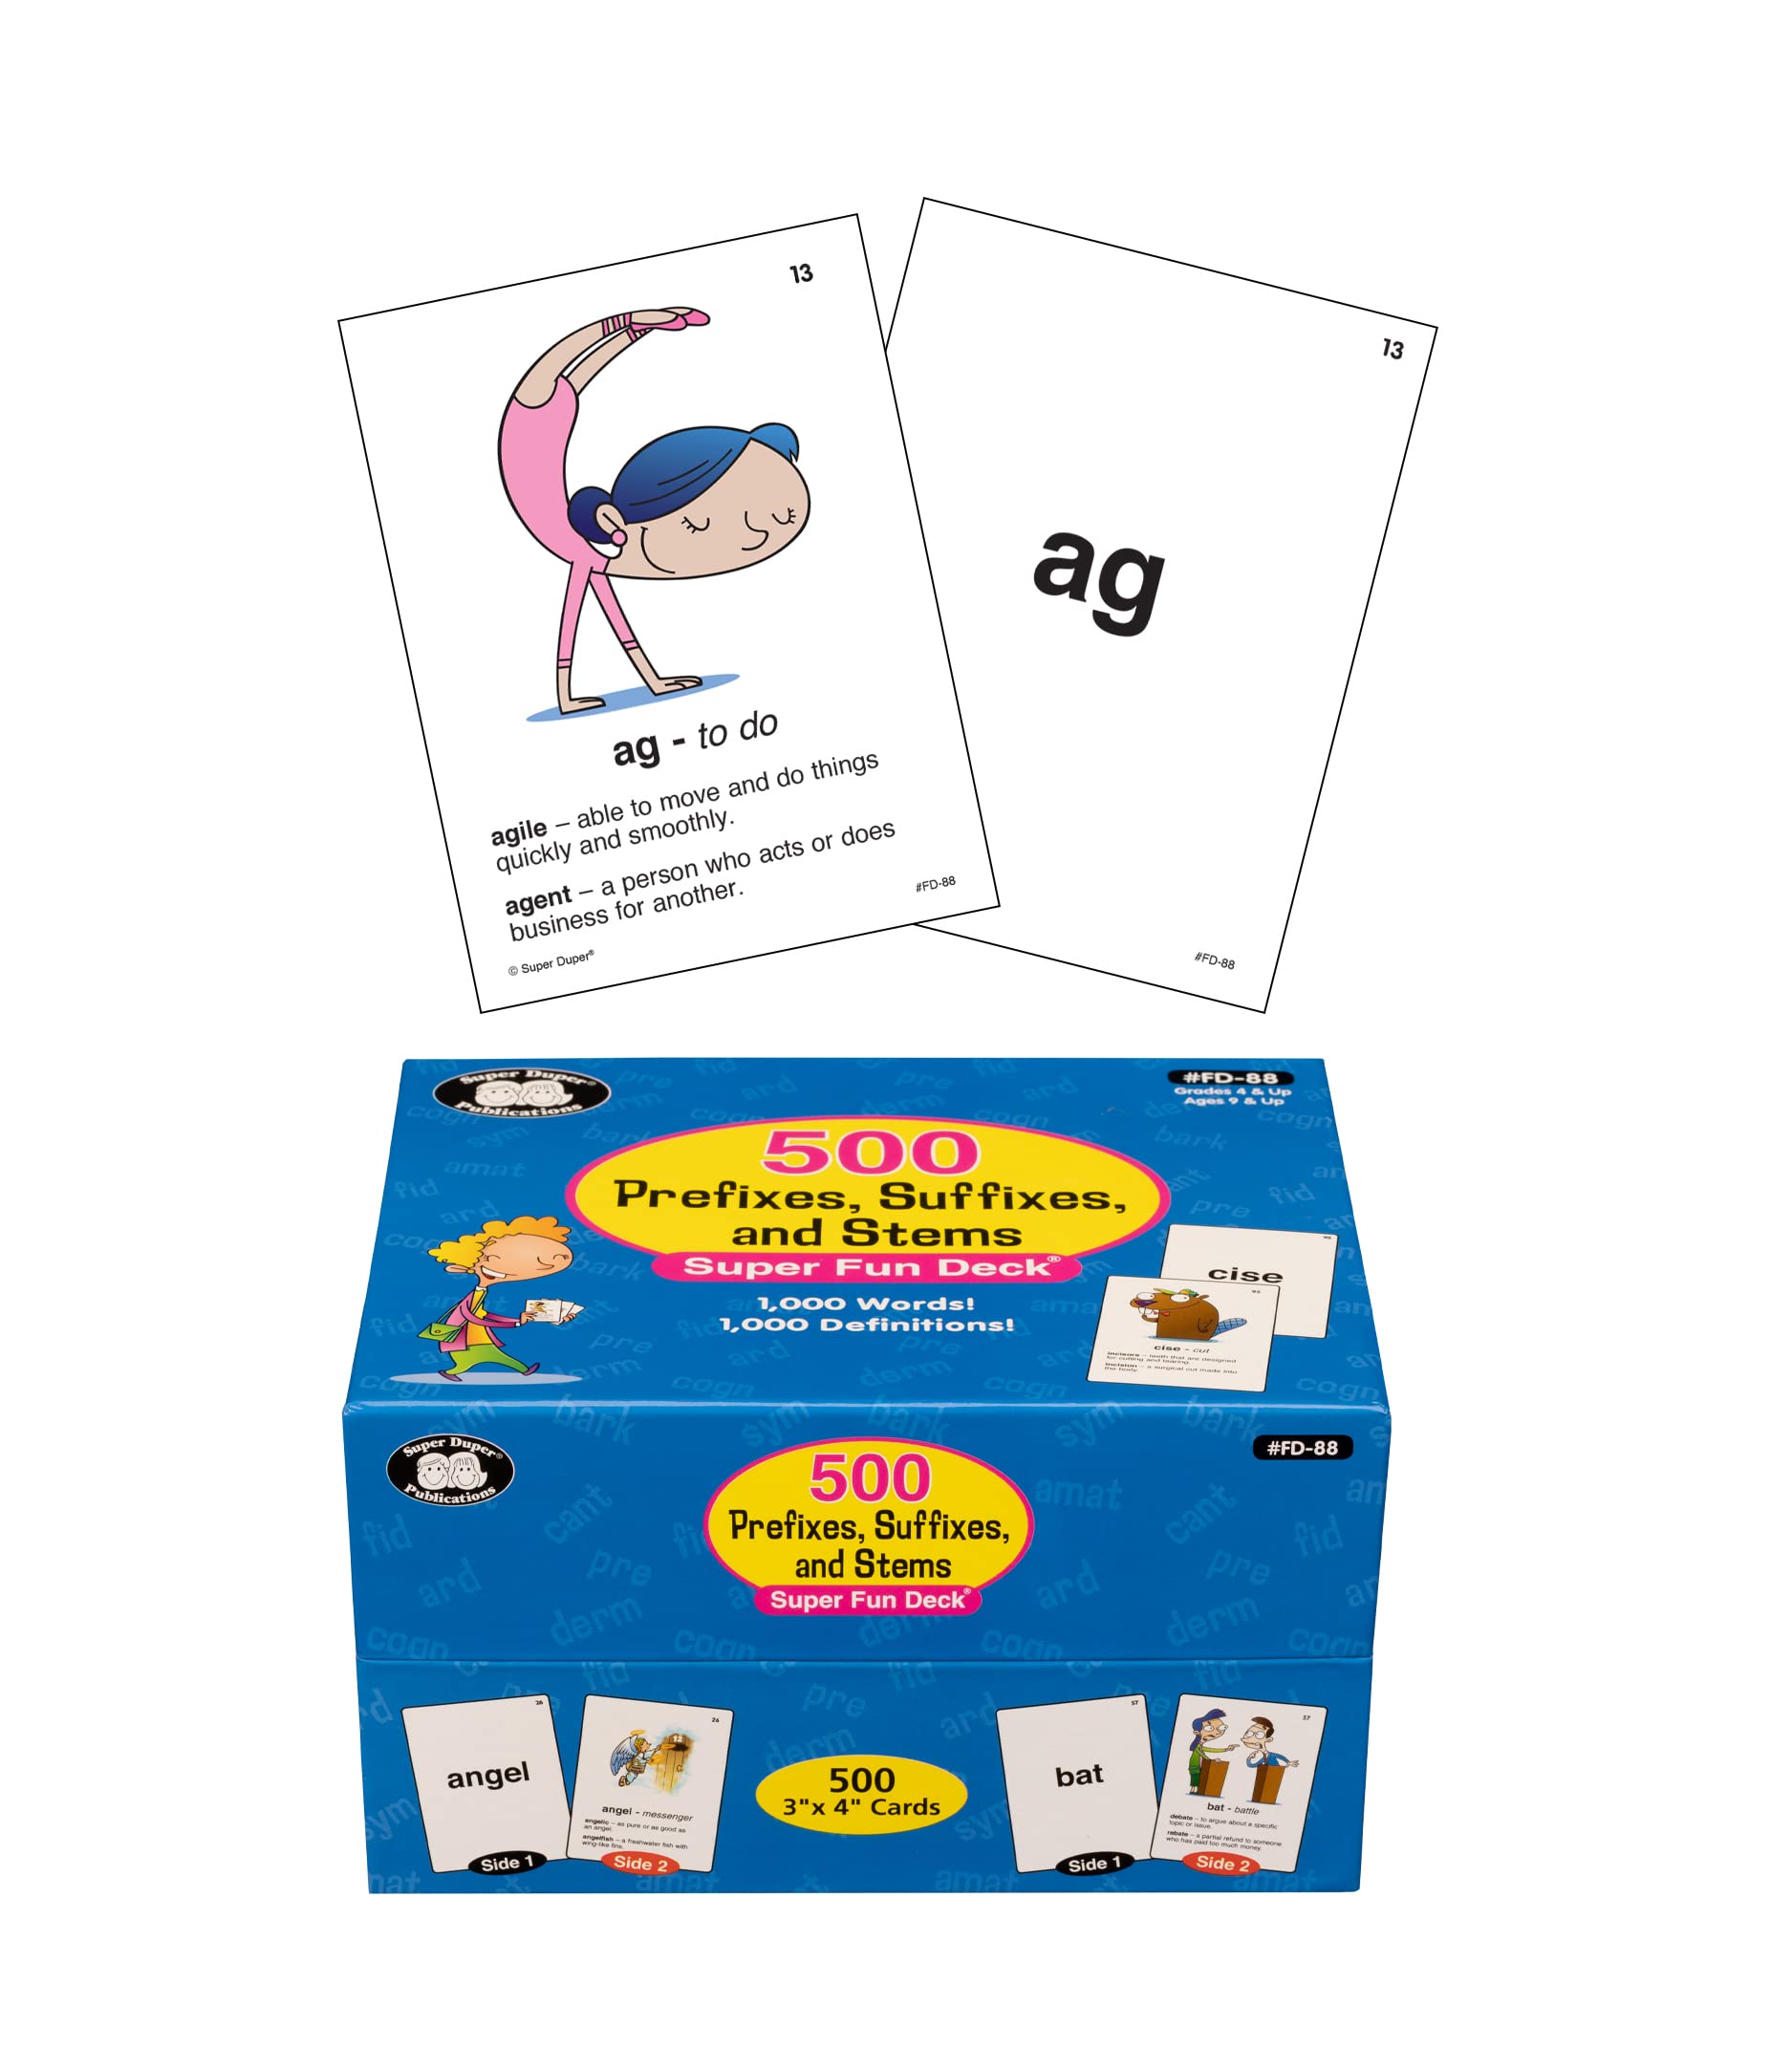 Super Duper Publications | Go for The Dough® Vocabulary Word Meaning Board  Game | Educational Learning Resource for Children